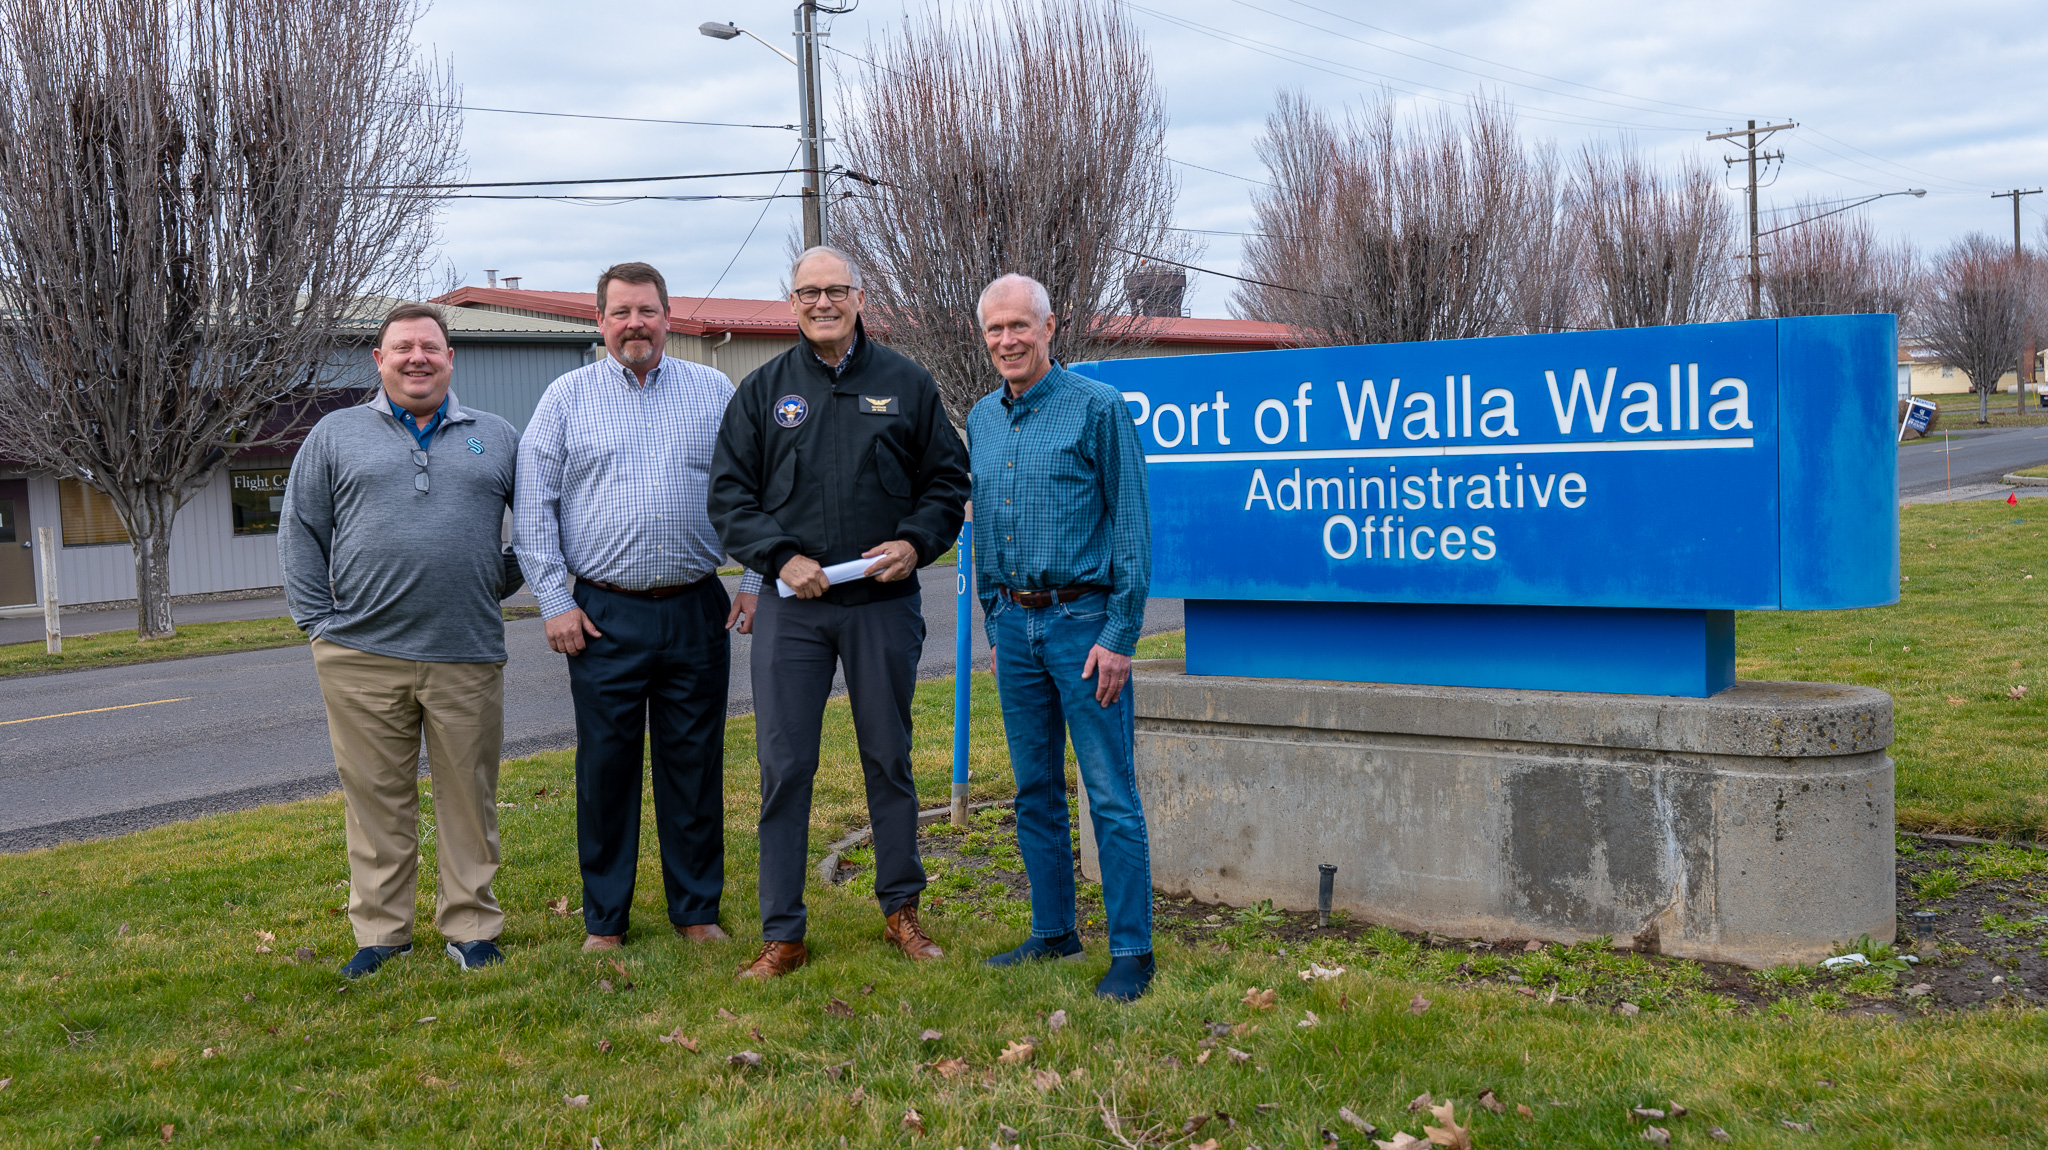 Four men standing in front of the Port of Walla Walla sign.